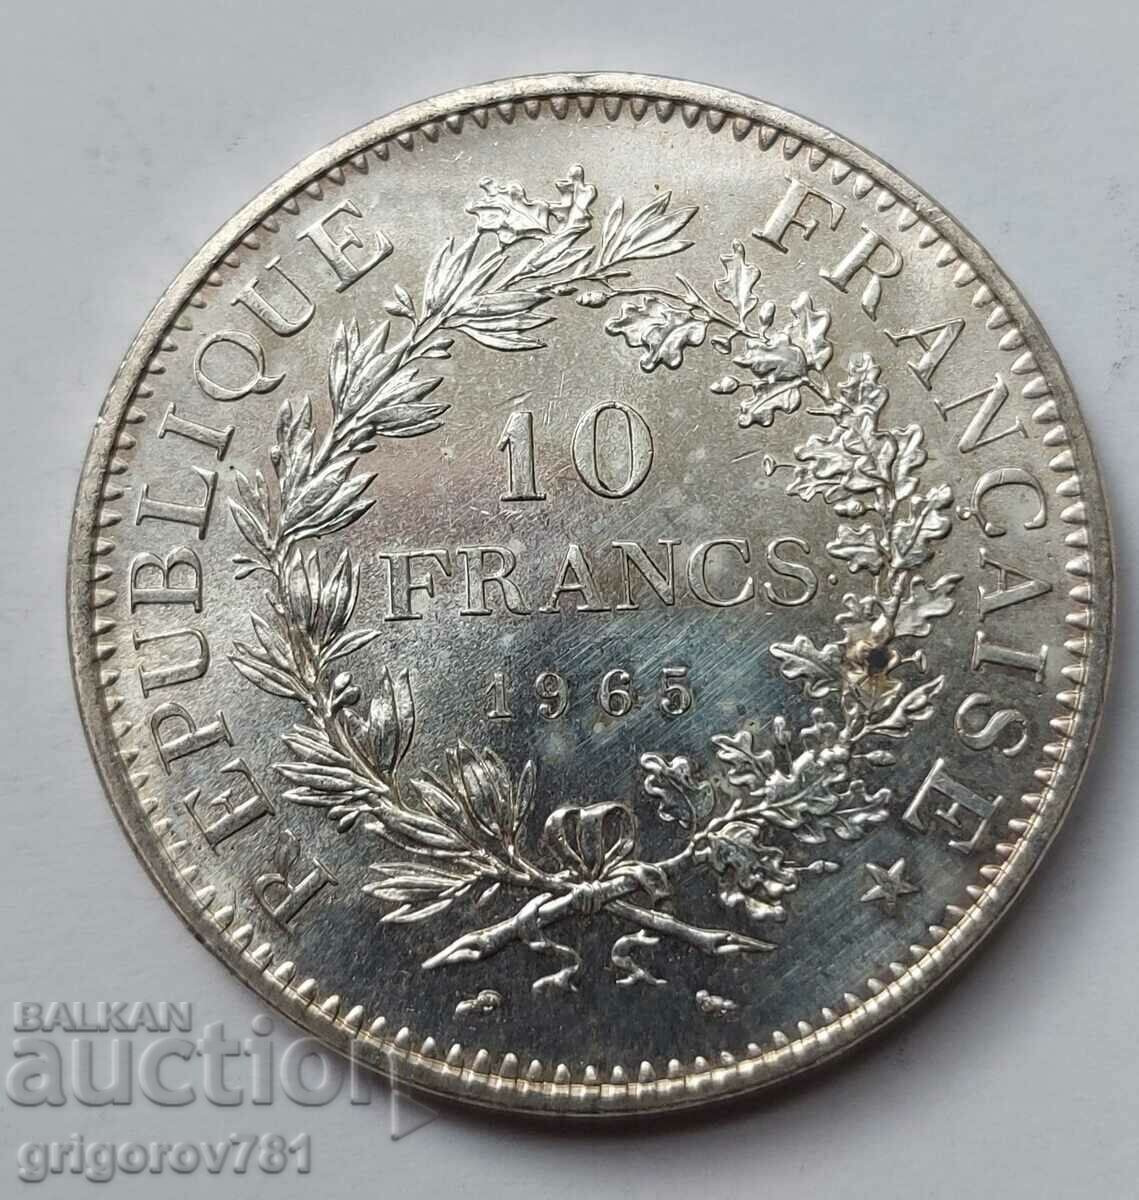 10 Francs Silver France 1965 - Silver Coin #46